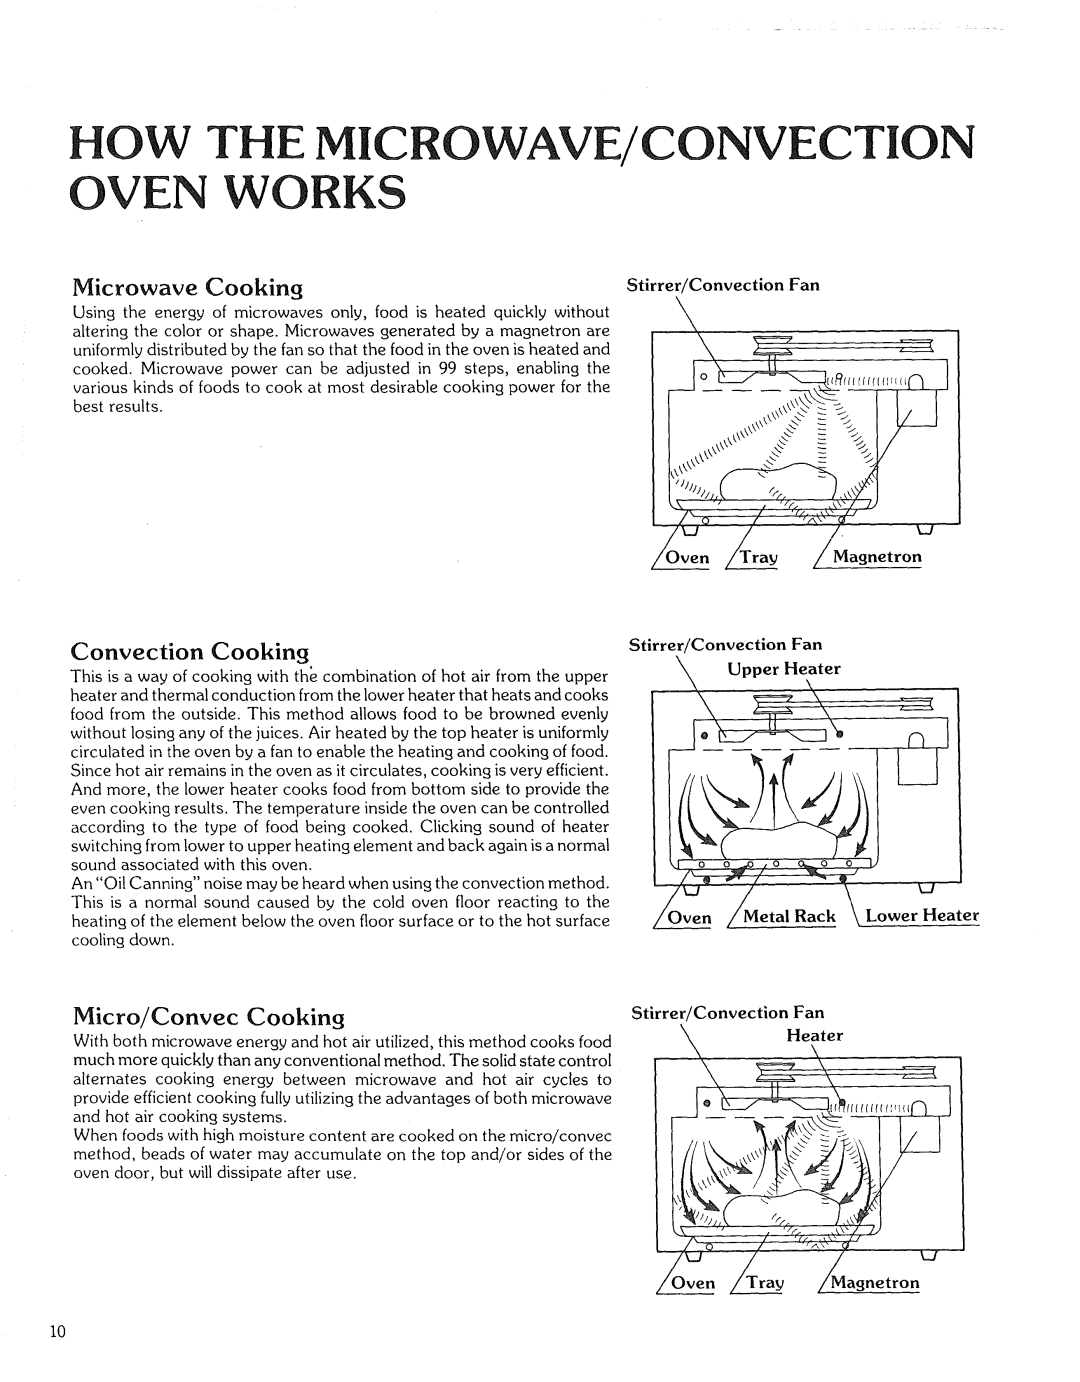 Kenmore 87561 manual How The Microwave/Convection Oven Works, Convection Cooking, Micro/Convec Cooking 